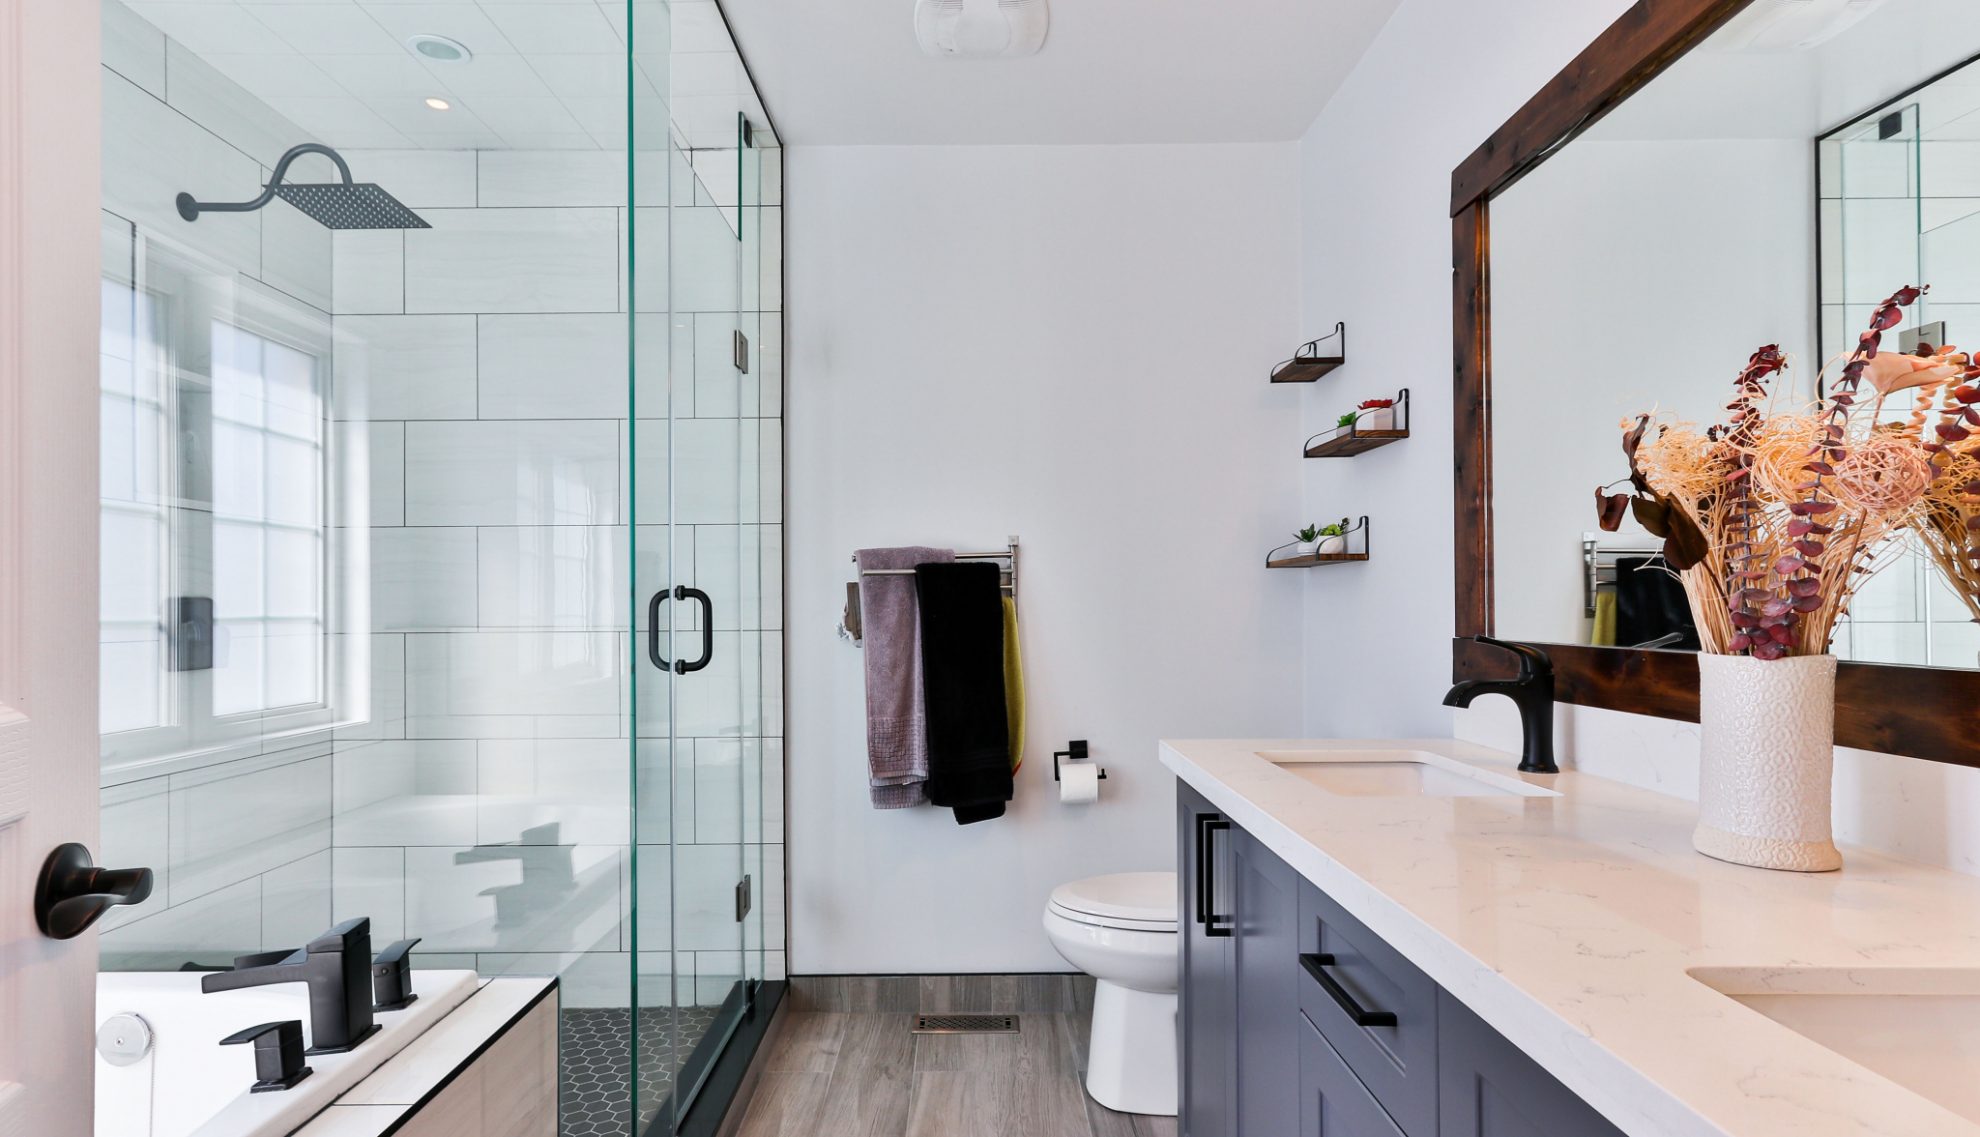 Modern bathroom with various fixtures and fittings